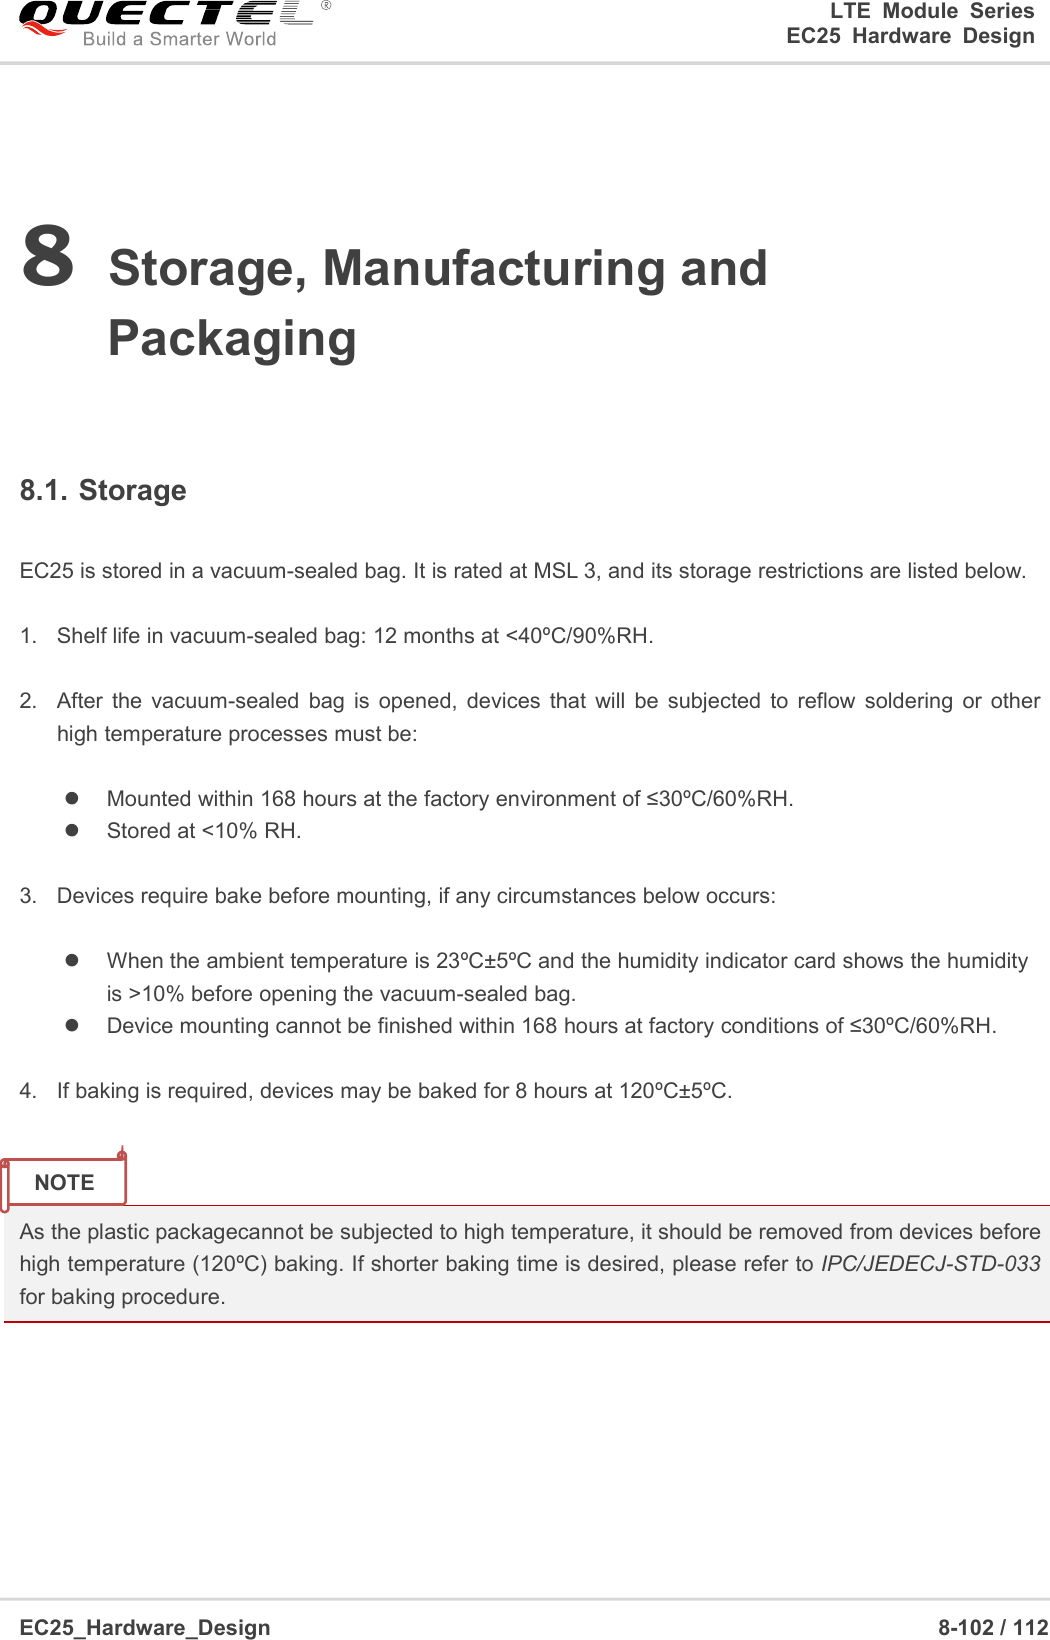 LTE Module SeriesEC25 Hardware DesignEC25_Hardware_Design 8-102 / 1128Storage, Manufacturing andPackaging8.1. StorageEC25 is stored in a vacuum-sealed bag. It is rated at MSL 3, and its storage restrictions are listed below.1. Shelf life in vacuum-sealed bag: 12 months at &lt;40ºC/90%RH.2. After the vacuum-sealed bag is opened, devices that will be subjected to reflow soldering or otherhigh temperature processes must be:Mounted within 168 hours at the factory environment of ≤30ºC/60%RH.Stored at &lt;10% RH.3. Devices require bake before mounting, if any circumstances below occurs:When the ambient temperature is 23ºC±5ºC and the humidity indicator card shows the humidityis &gt;10% before opening the vacuum-sealed bag.Device mounting cannot be finished within 168 hours at factory conditions of ≤30ºC/60%RH.4. If baking is required, devices may be baked for 8 hours at 120ºC±5ºC.As the plastic packagecannot be subjected to high temperature, it should be removed from devices beforehigh temperature (120ºC) baking. If shorter baking time is desired, please refer to IPC/JEDECJ-STD-033for baking procedure.NOTE